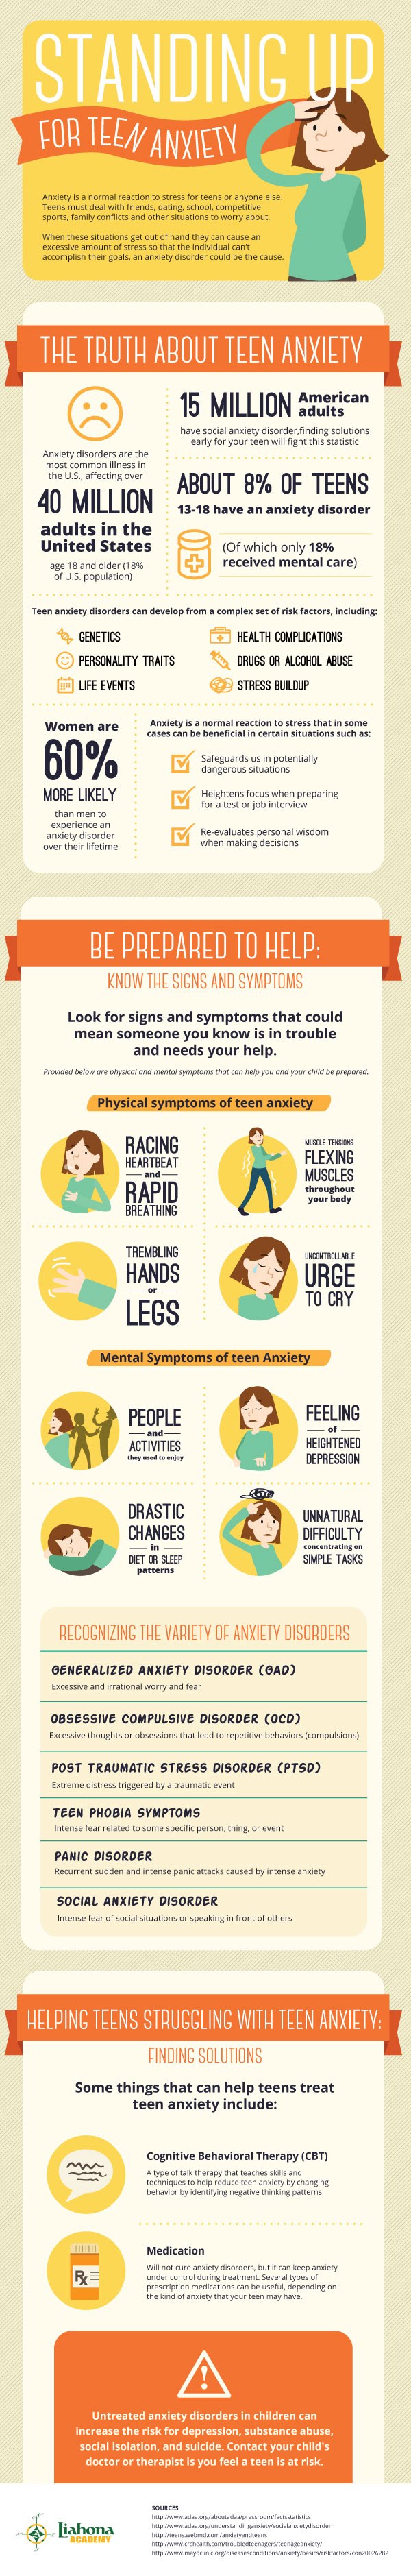 Standing Up For Teen Anxiety #Infographic